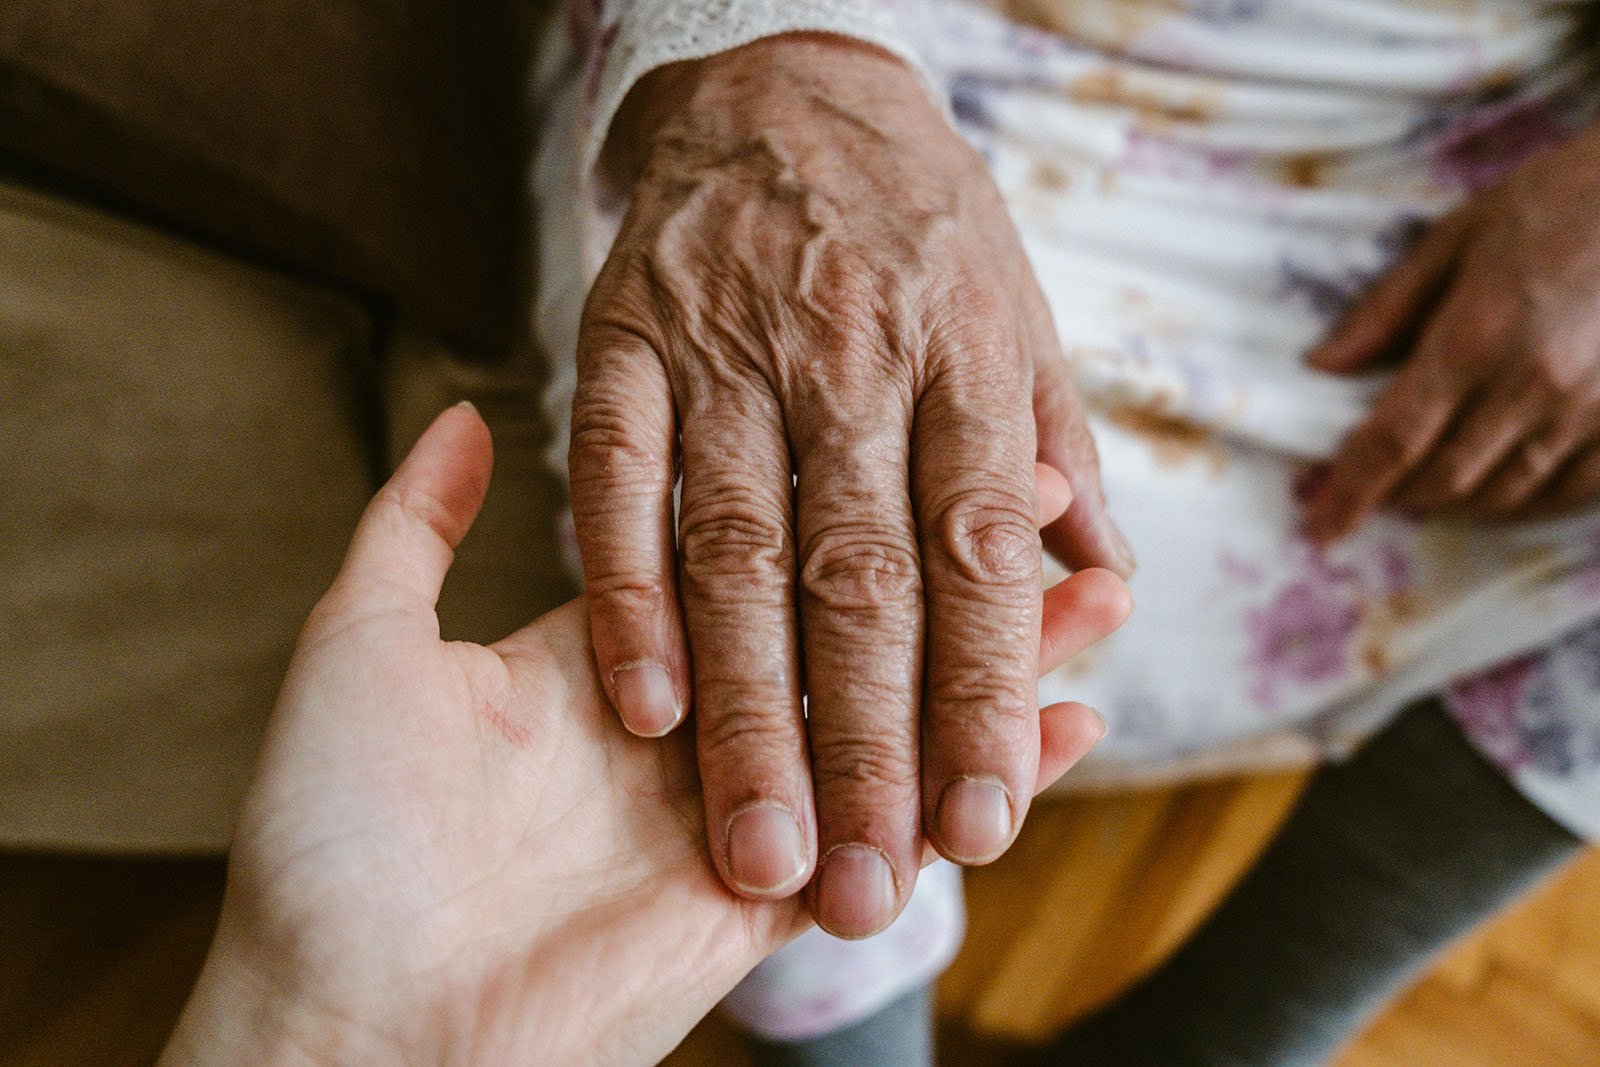 Younger person holding elderly person's hand